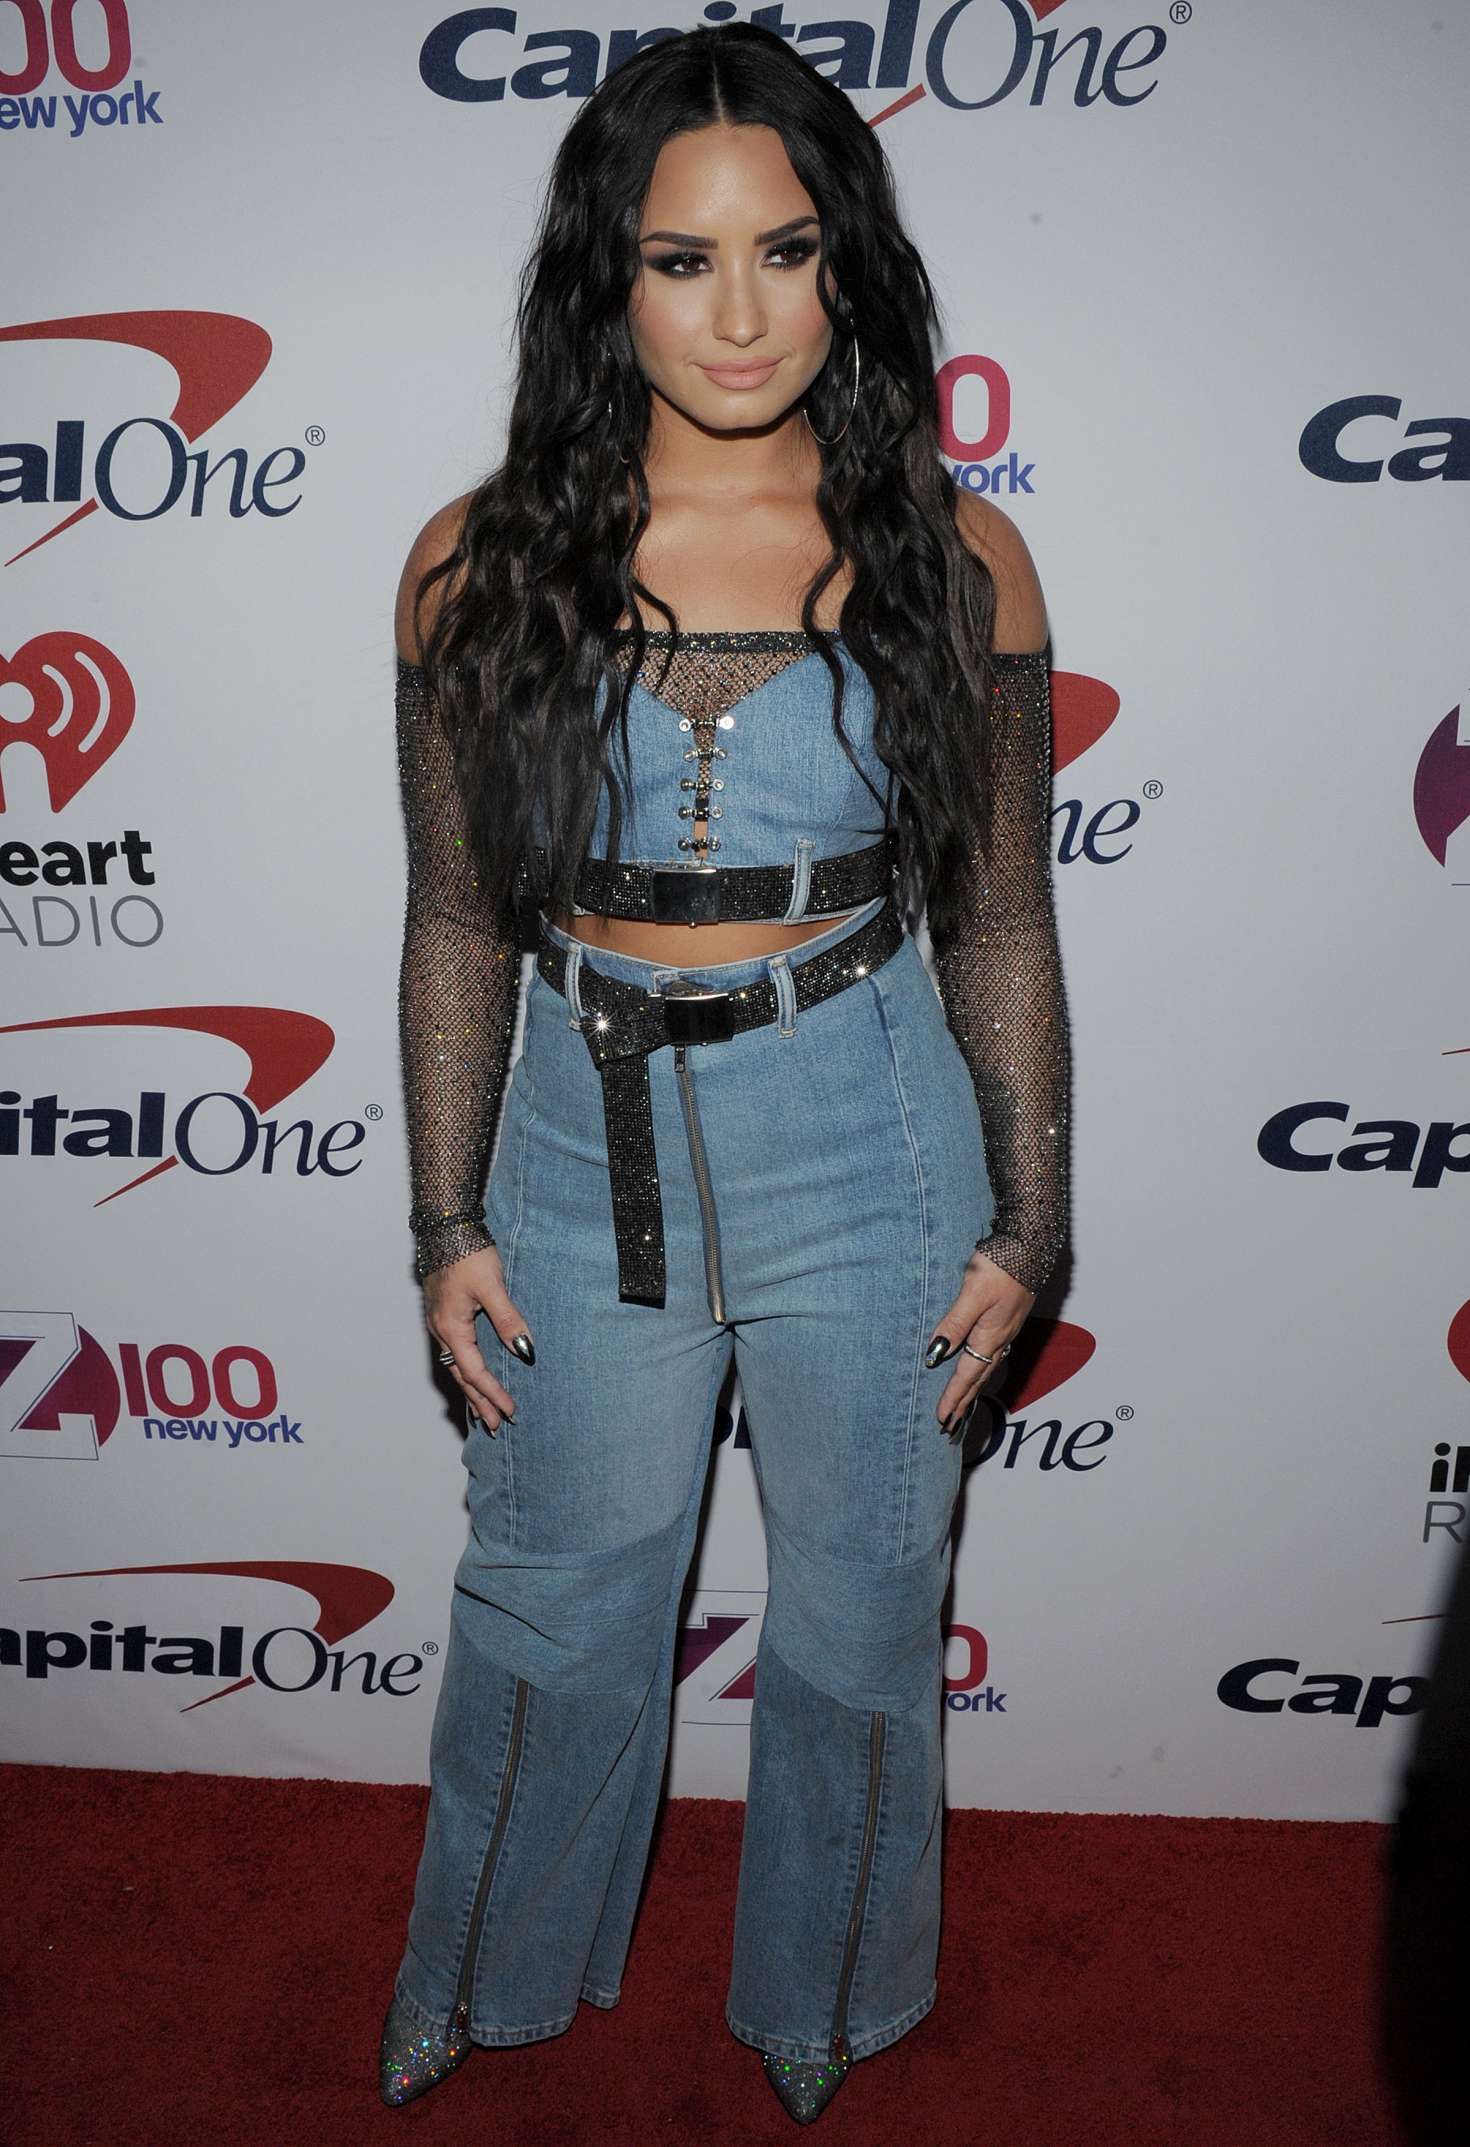 Index of /wp-content/uploads/photos/demi-lovato/z100-s-jingle-ball-2017 ...